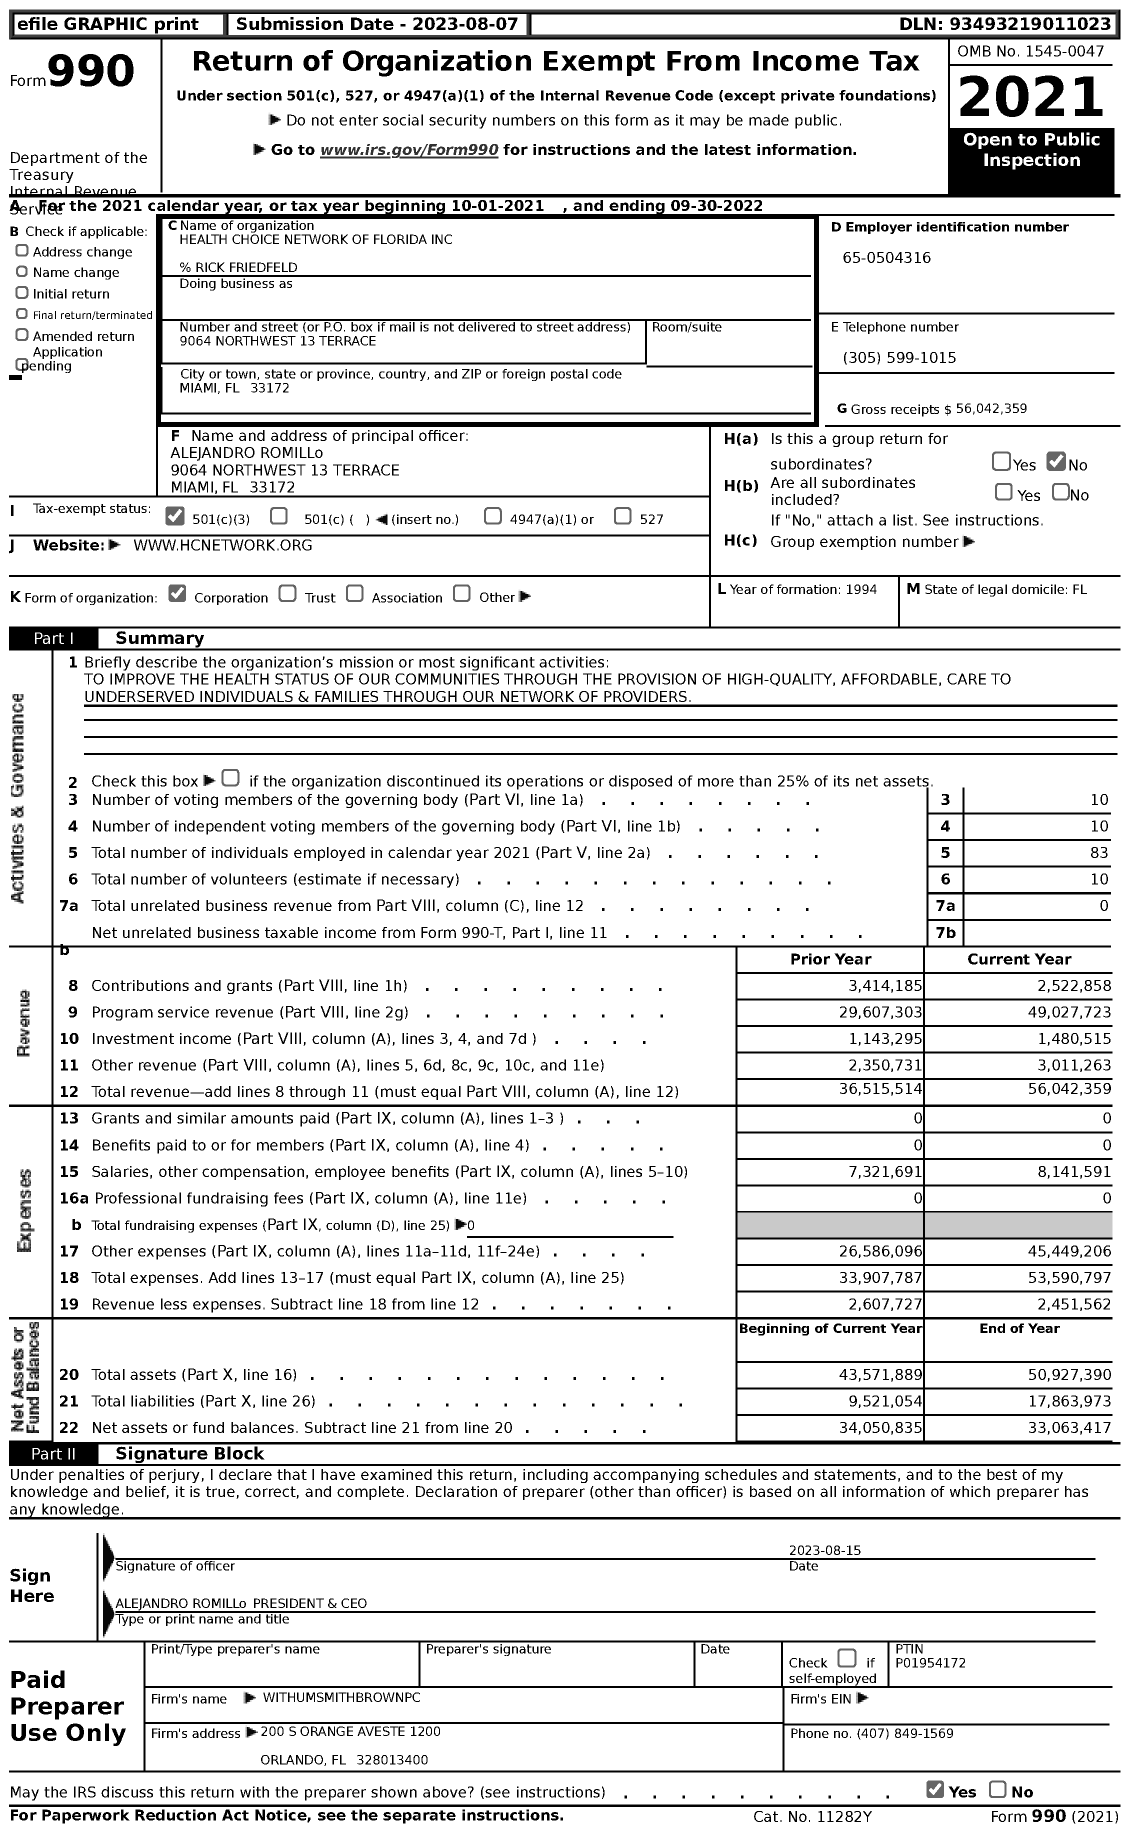 Image of first page of 2021 Form 990 for Health Choice Network of Florida (HCN)